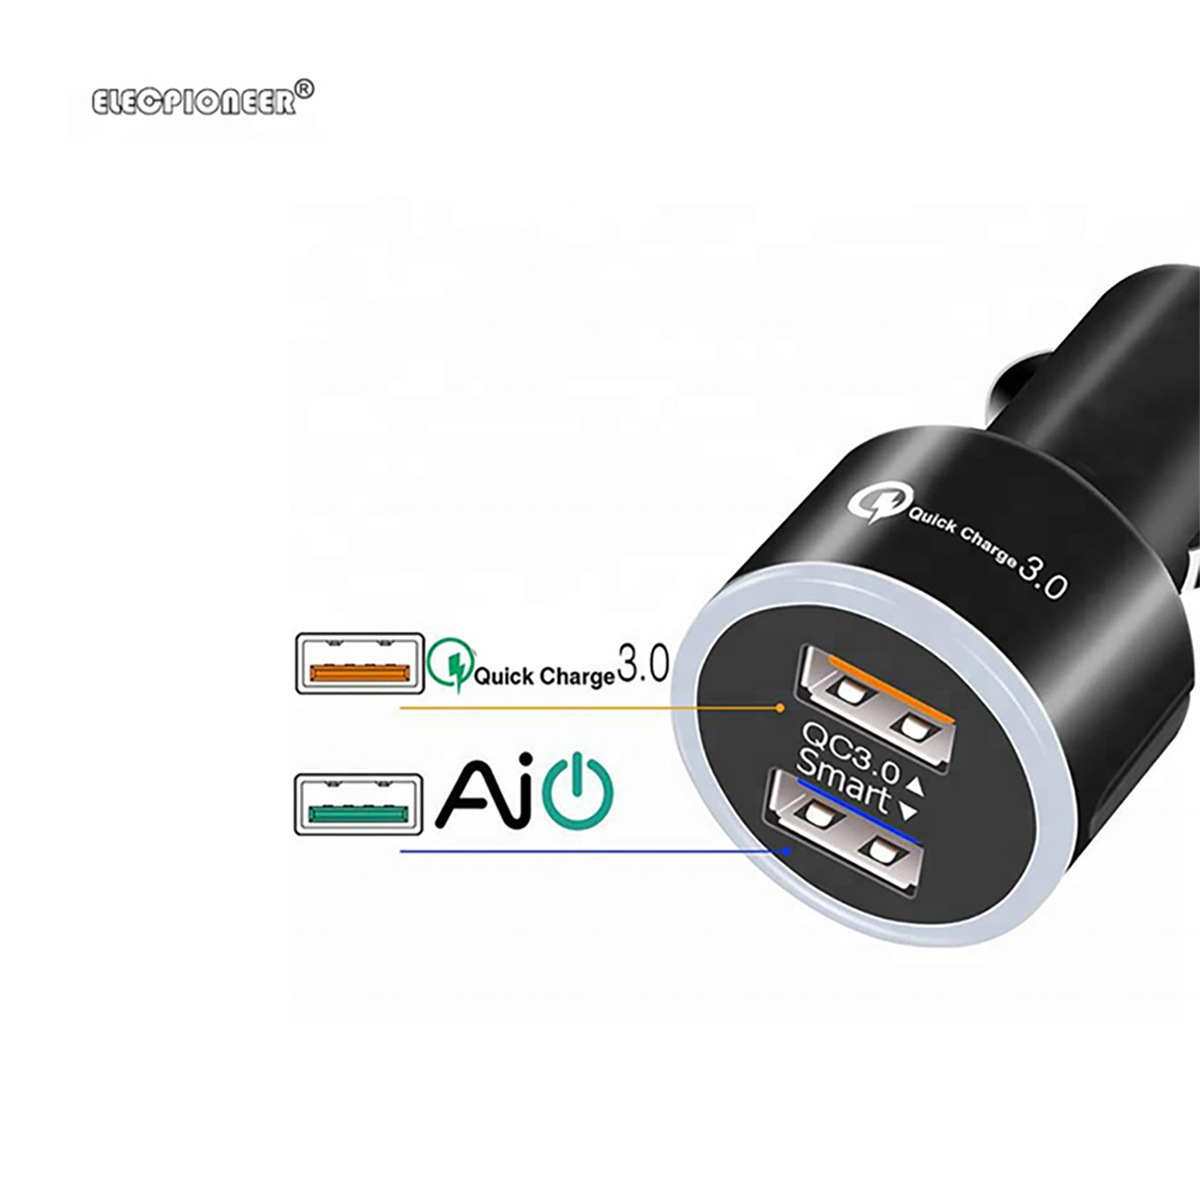 1. CR-10 QC 3.0 Dual USB Car Charger Bulk Purchase and Corporate purchase from China Union Power -Description-